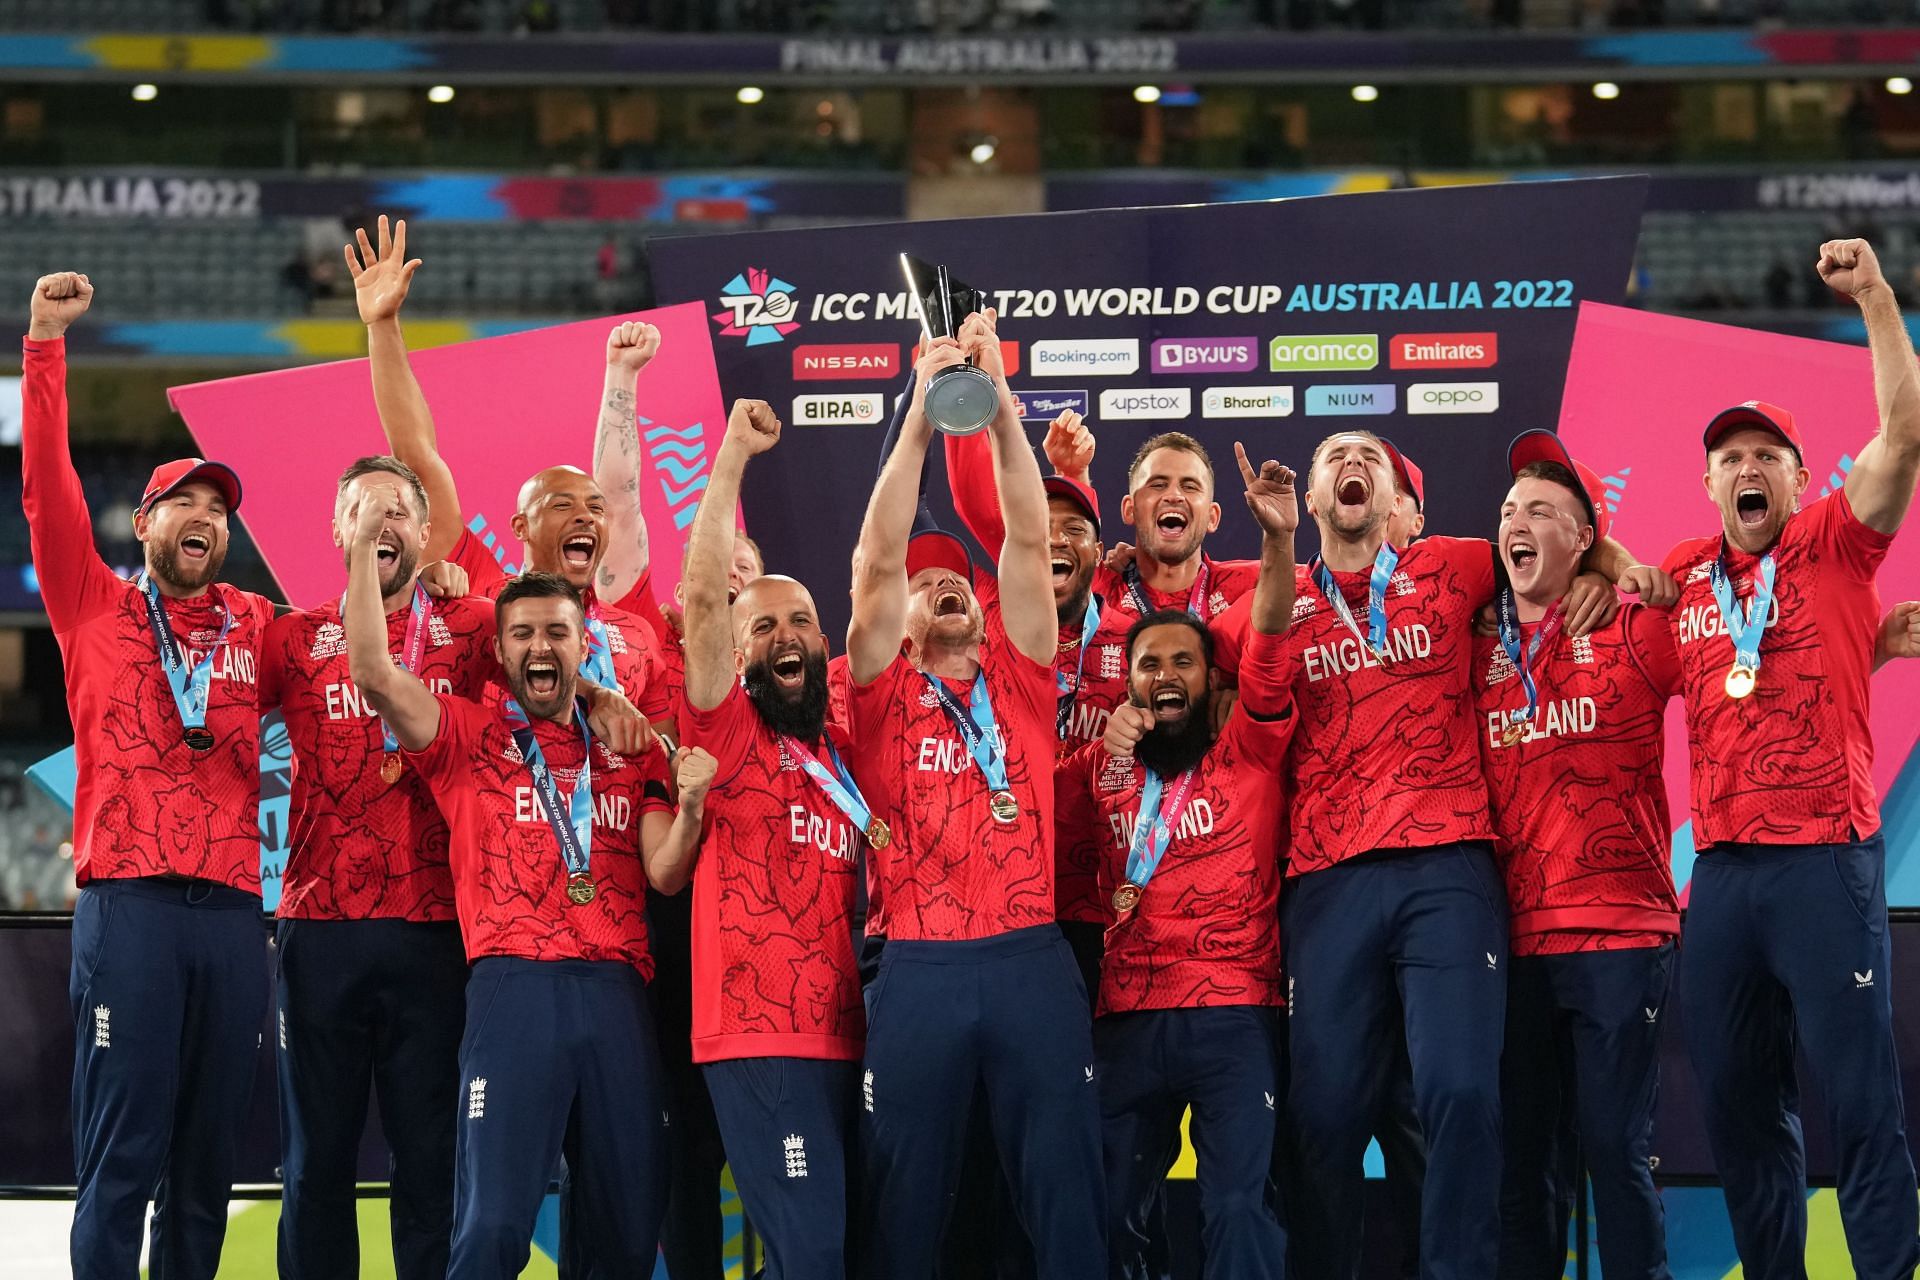 England are now the reigning world champions in both T20I and ODI format